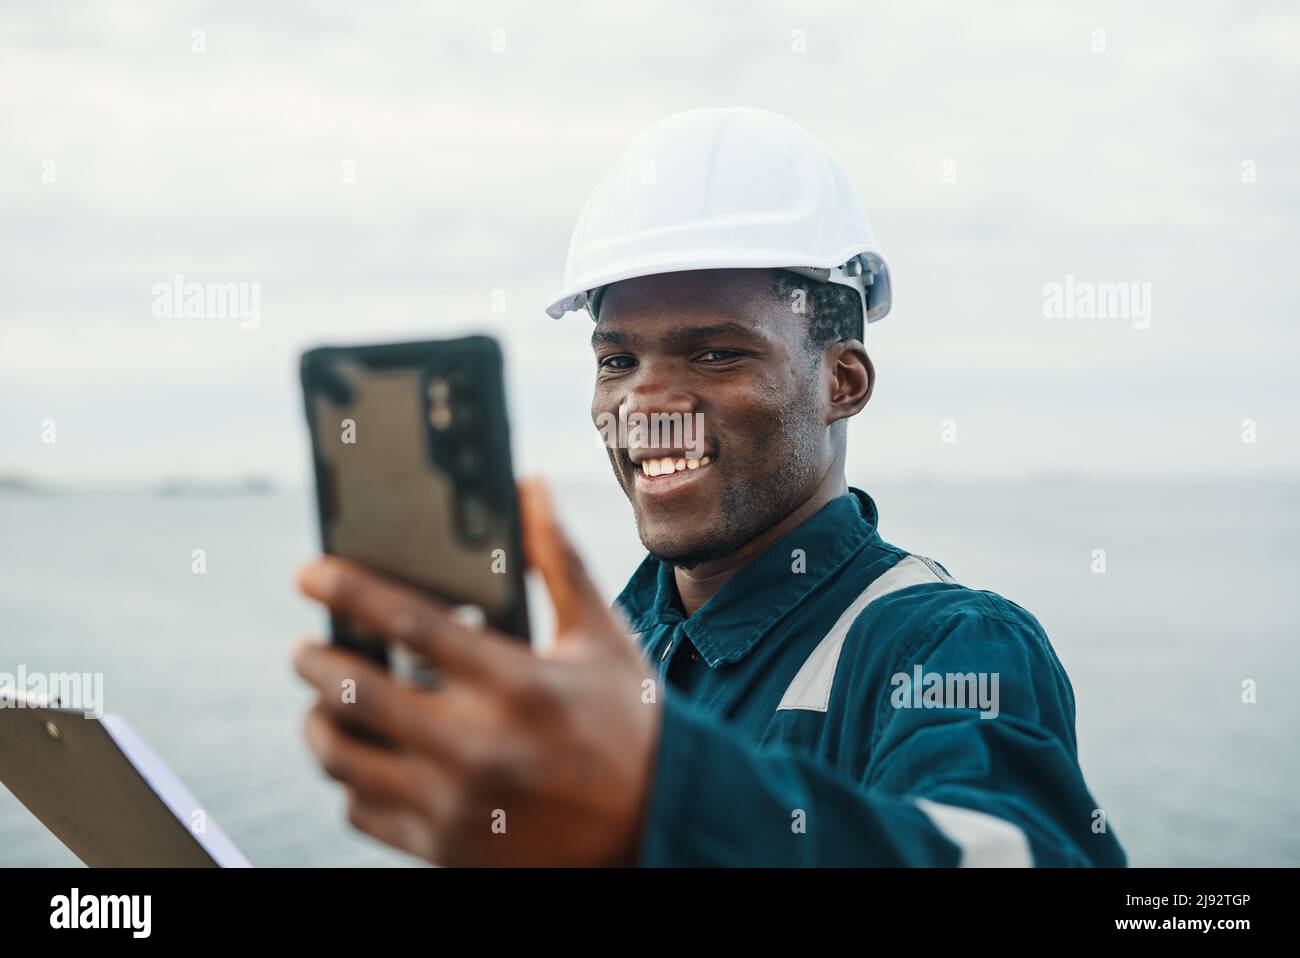 Optimistic African American worker making video call near sea Stock Photo